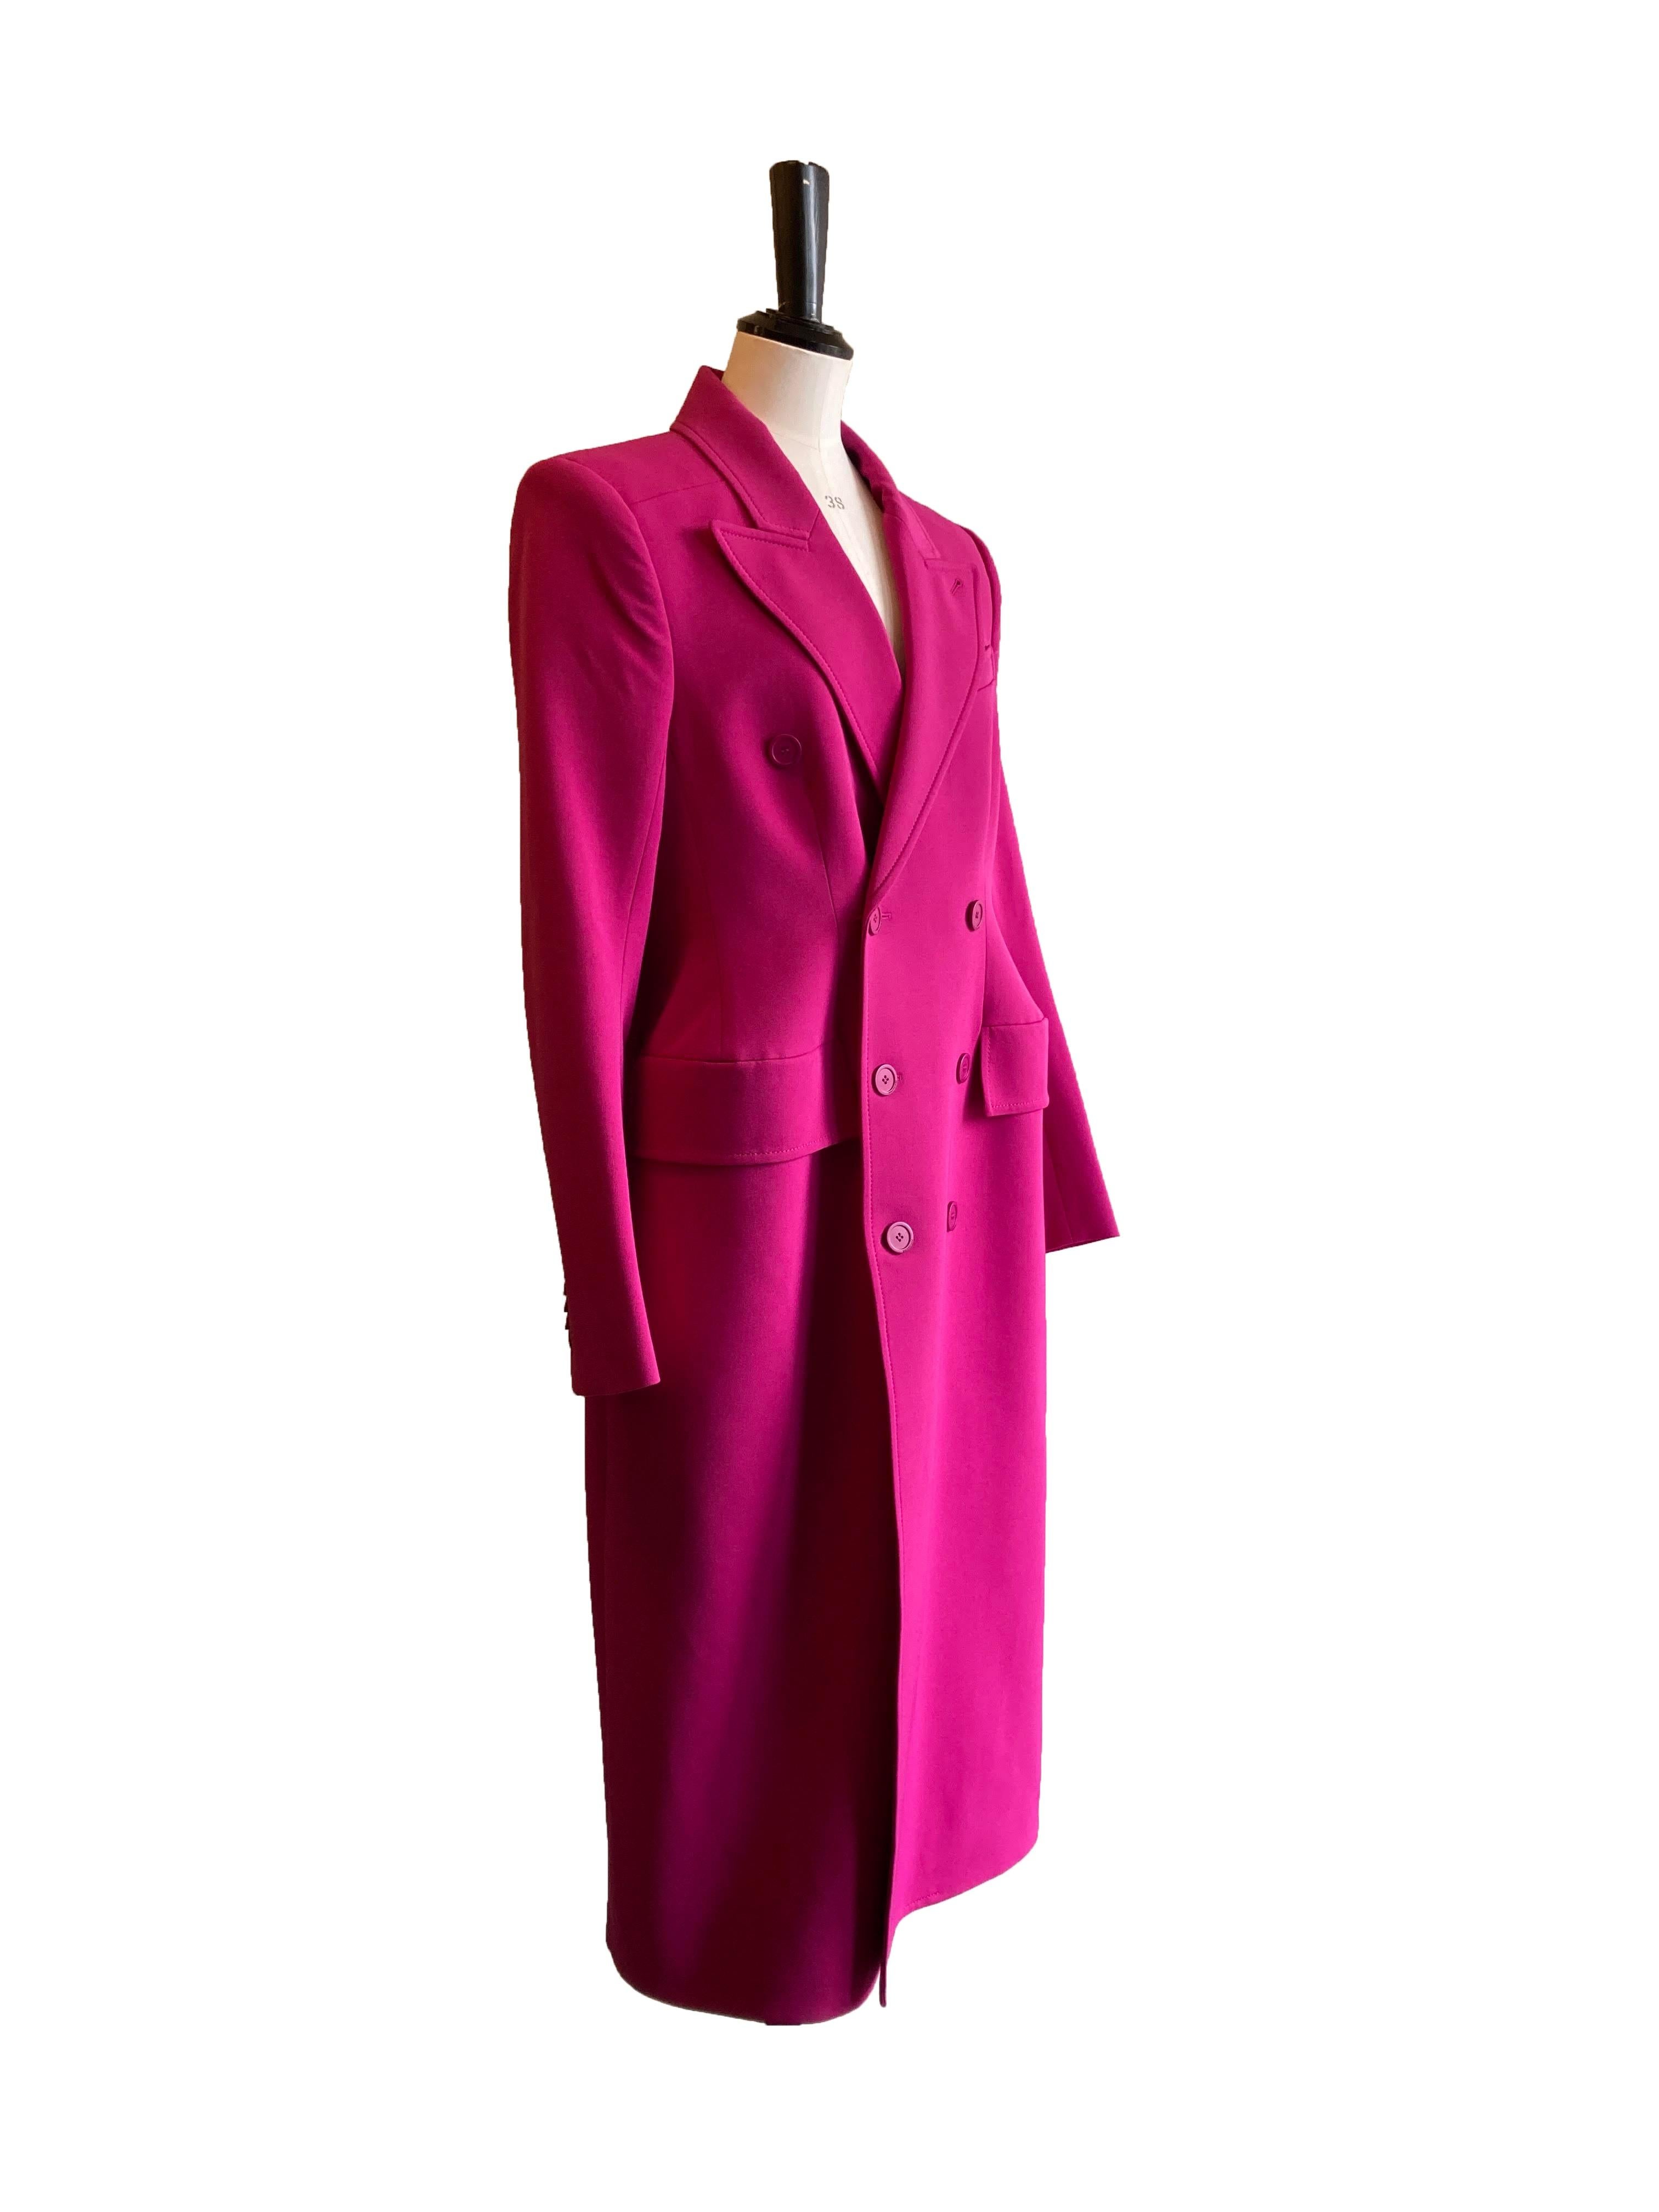 Hot pink Hourglass coat from Balenciaga. From the Resort Collection in 2023.

Hot pink polyester and wool blend upper featuring signature Balenciaga silhouette with emphasised hips, cinched in at the waist and with strong shoulders to create an